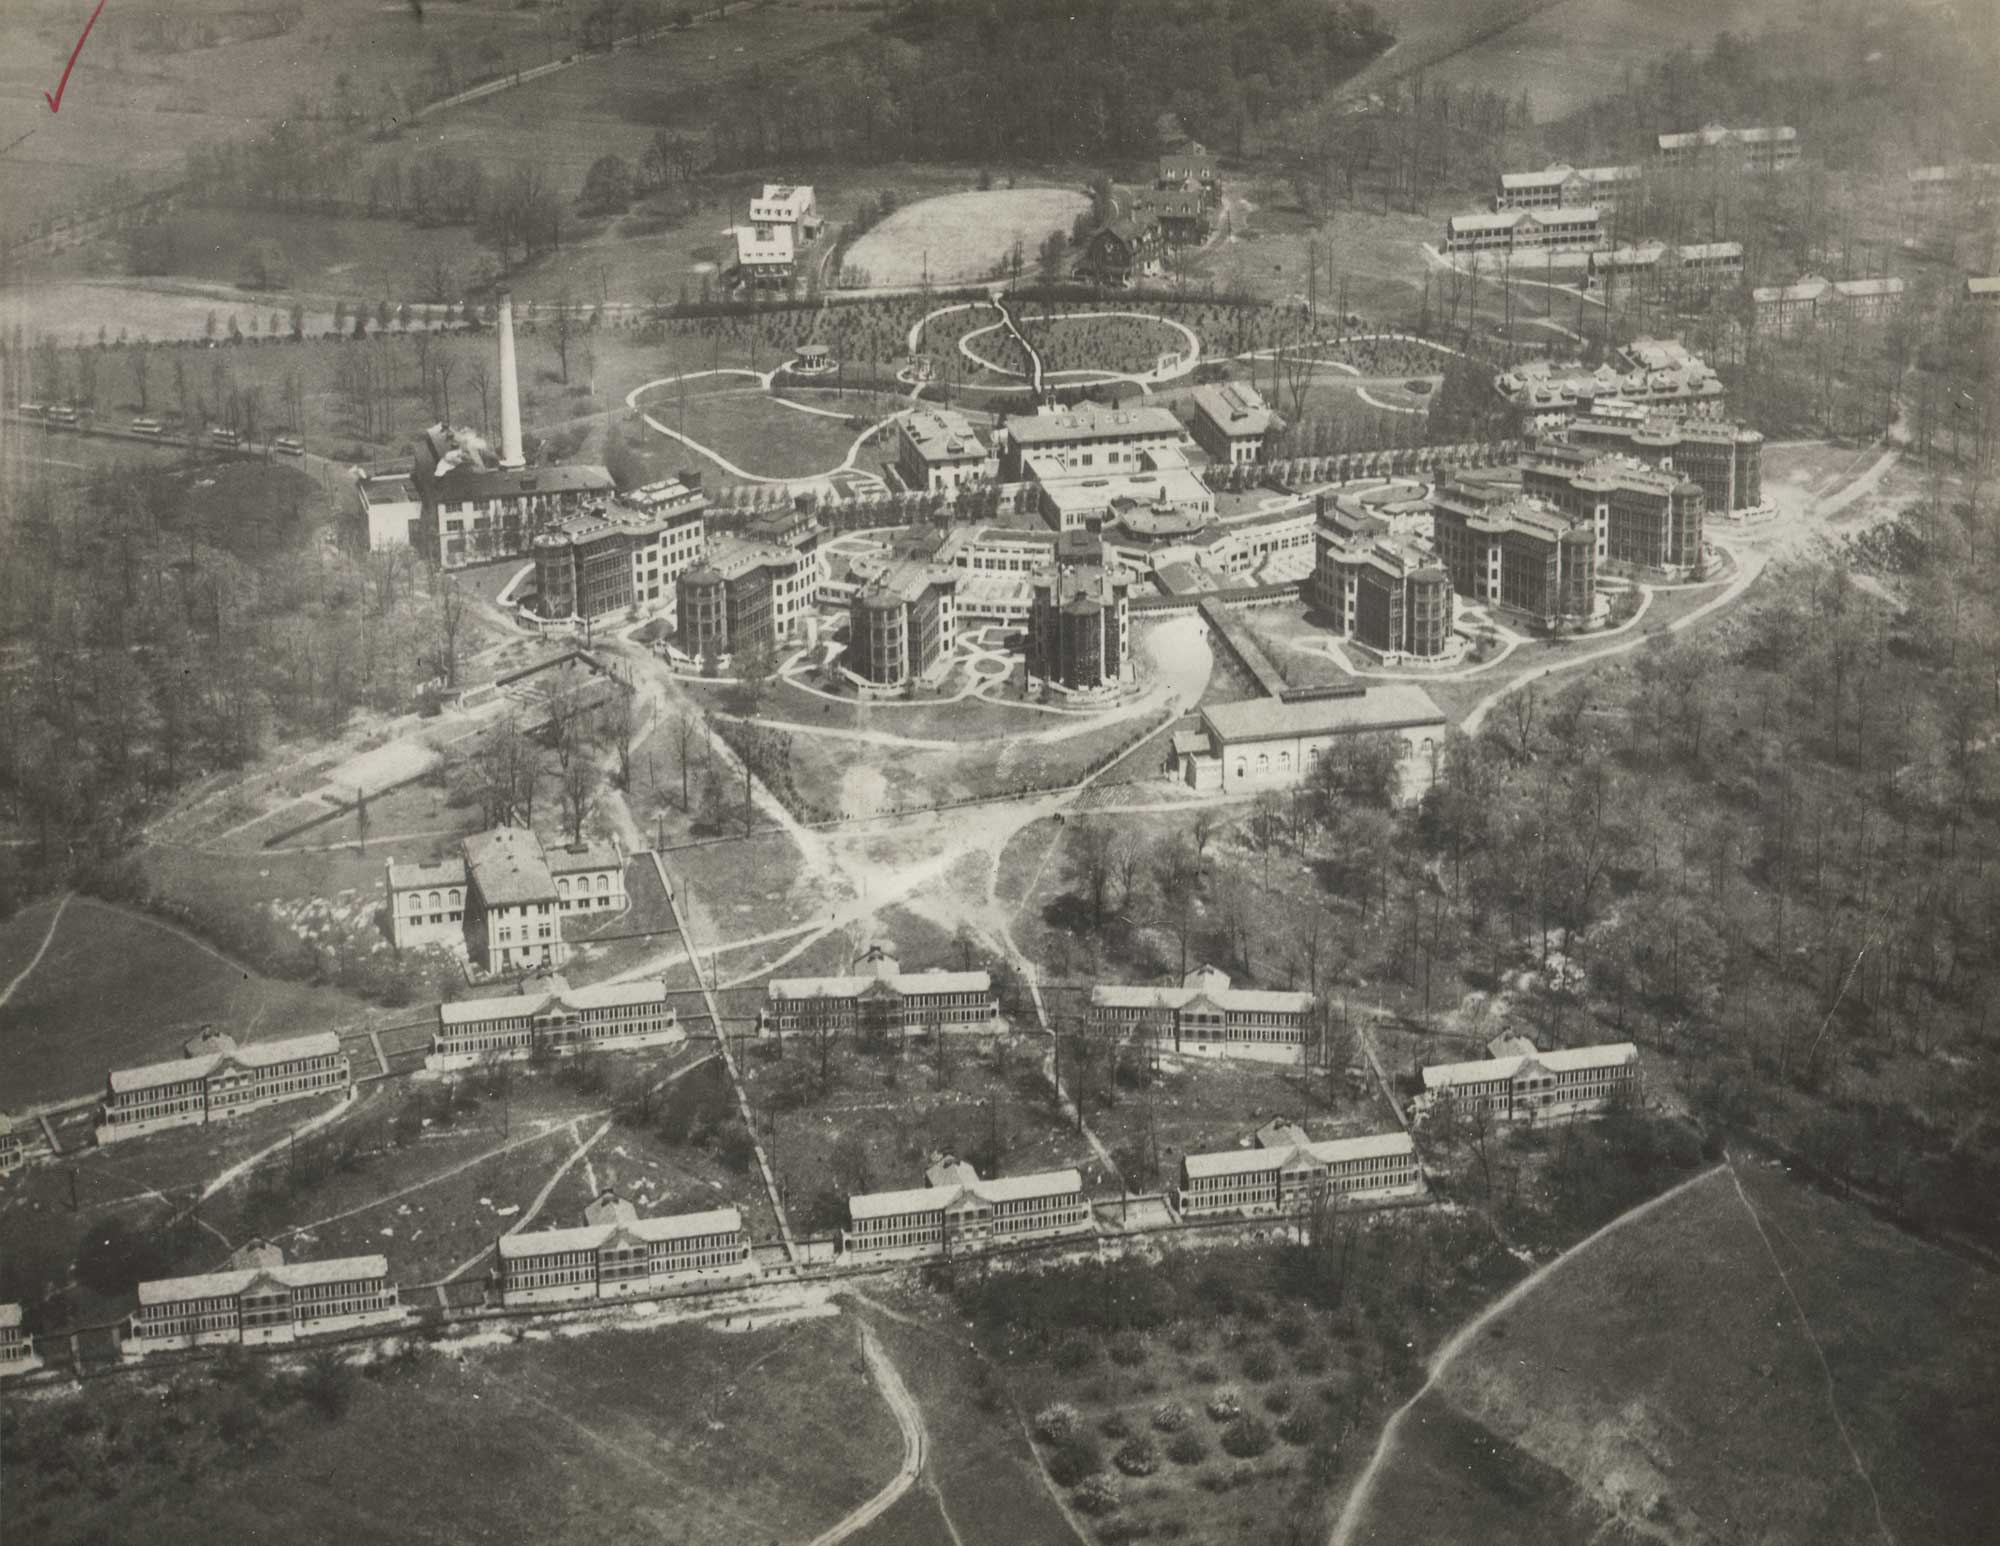 High general view of hospital buildings and grounds